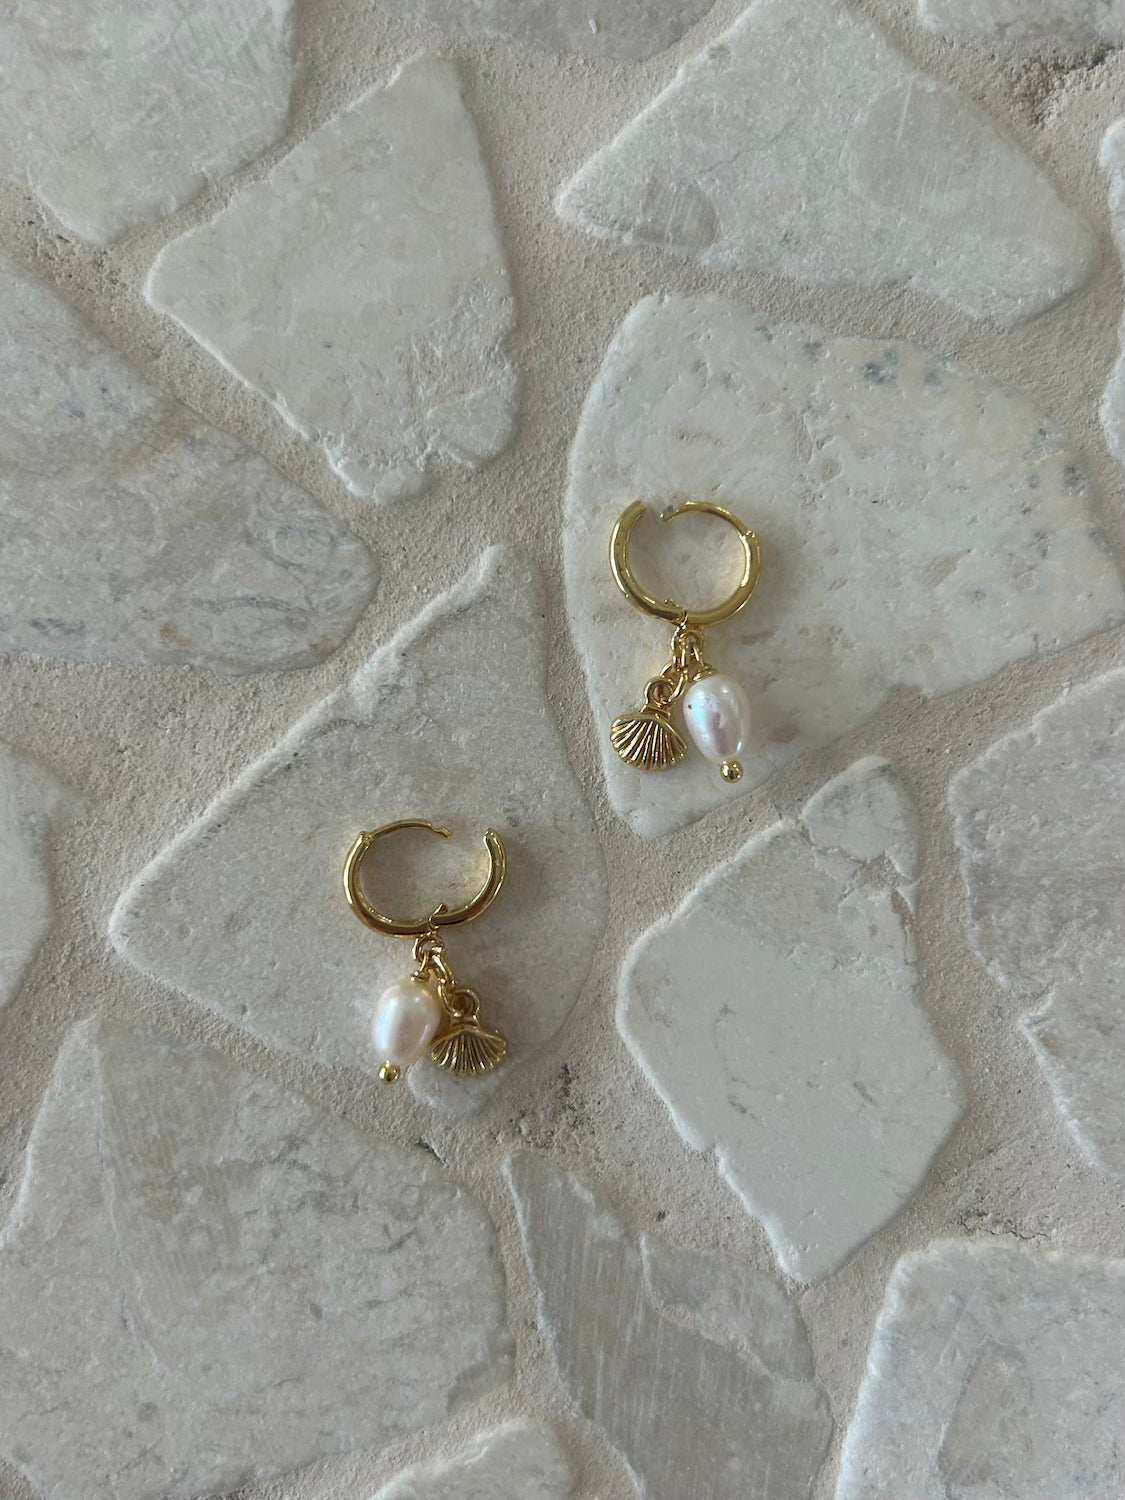 Shelly Earrings / 18k Gold Plated Earrings with pearl and shell charms